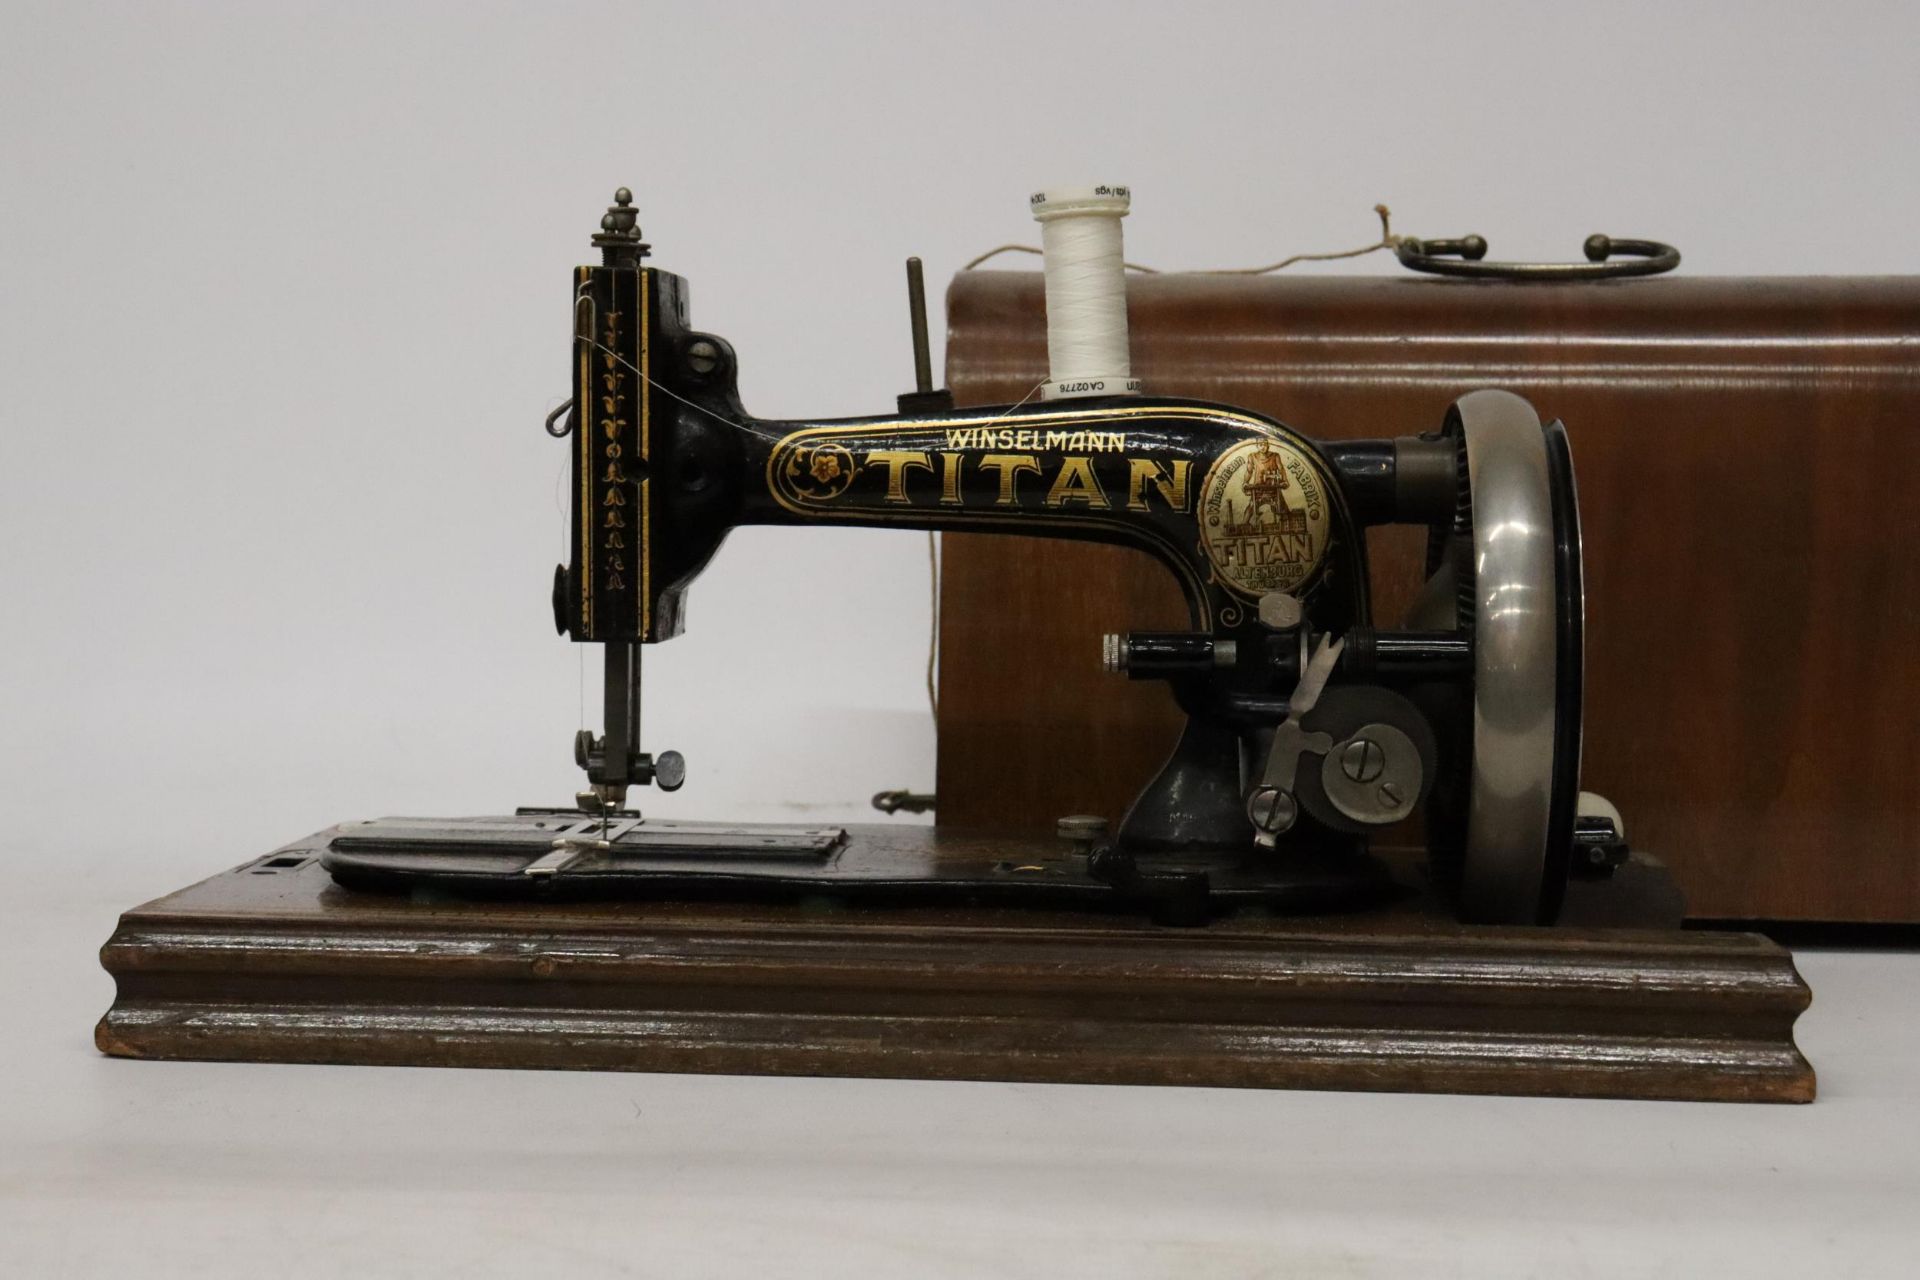 A VINTAGE WINSELMANN 'TITAN' SEWING MACHINE WITH ORIGINAL CASE AND KEY - Image 2 of 7